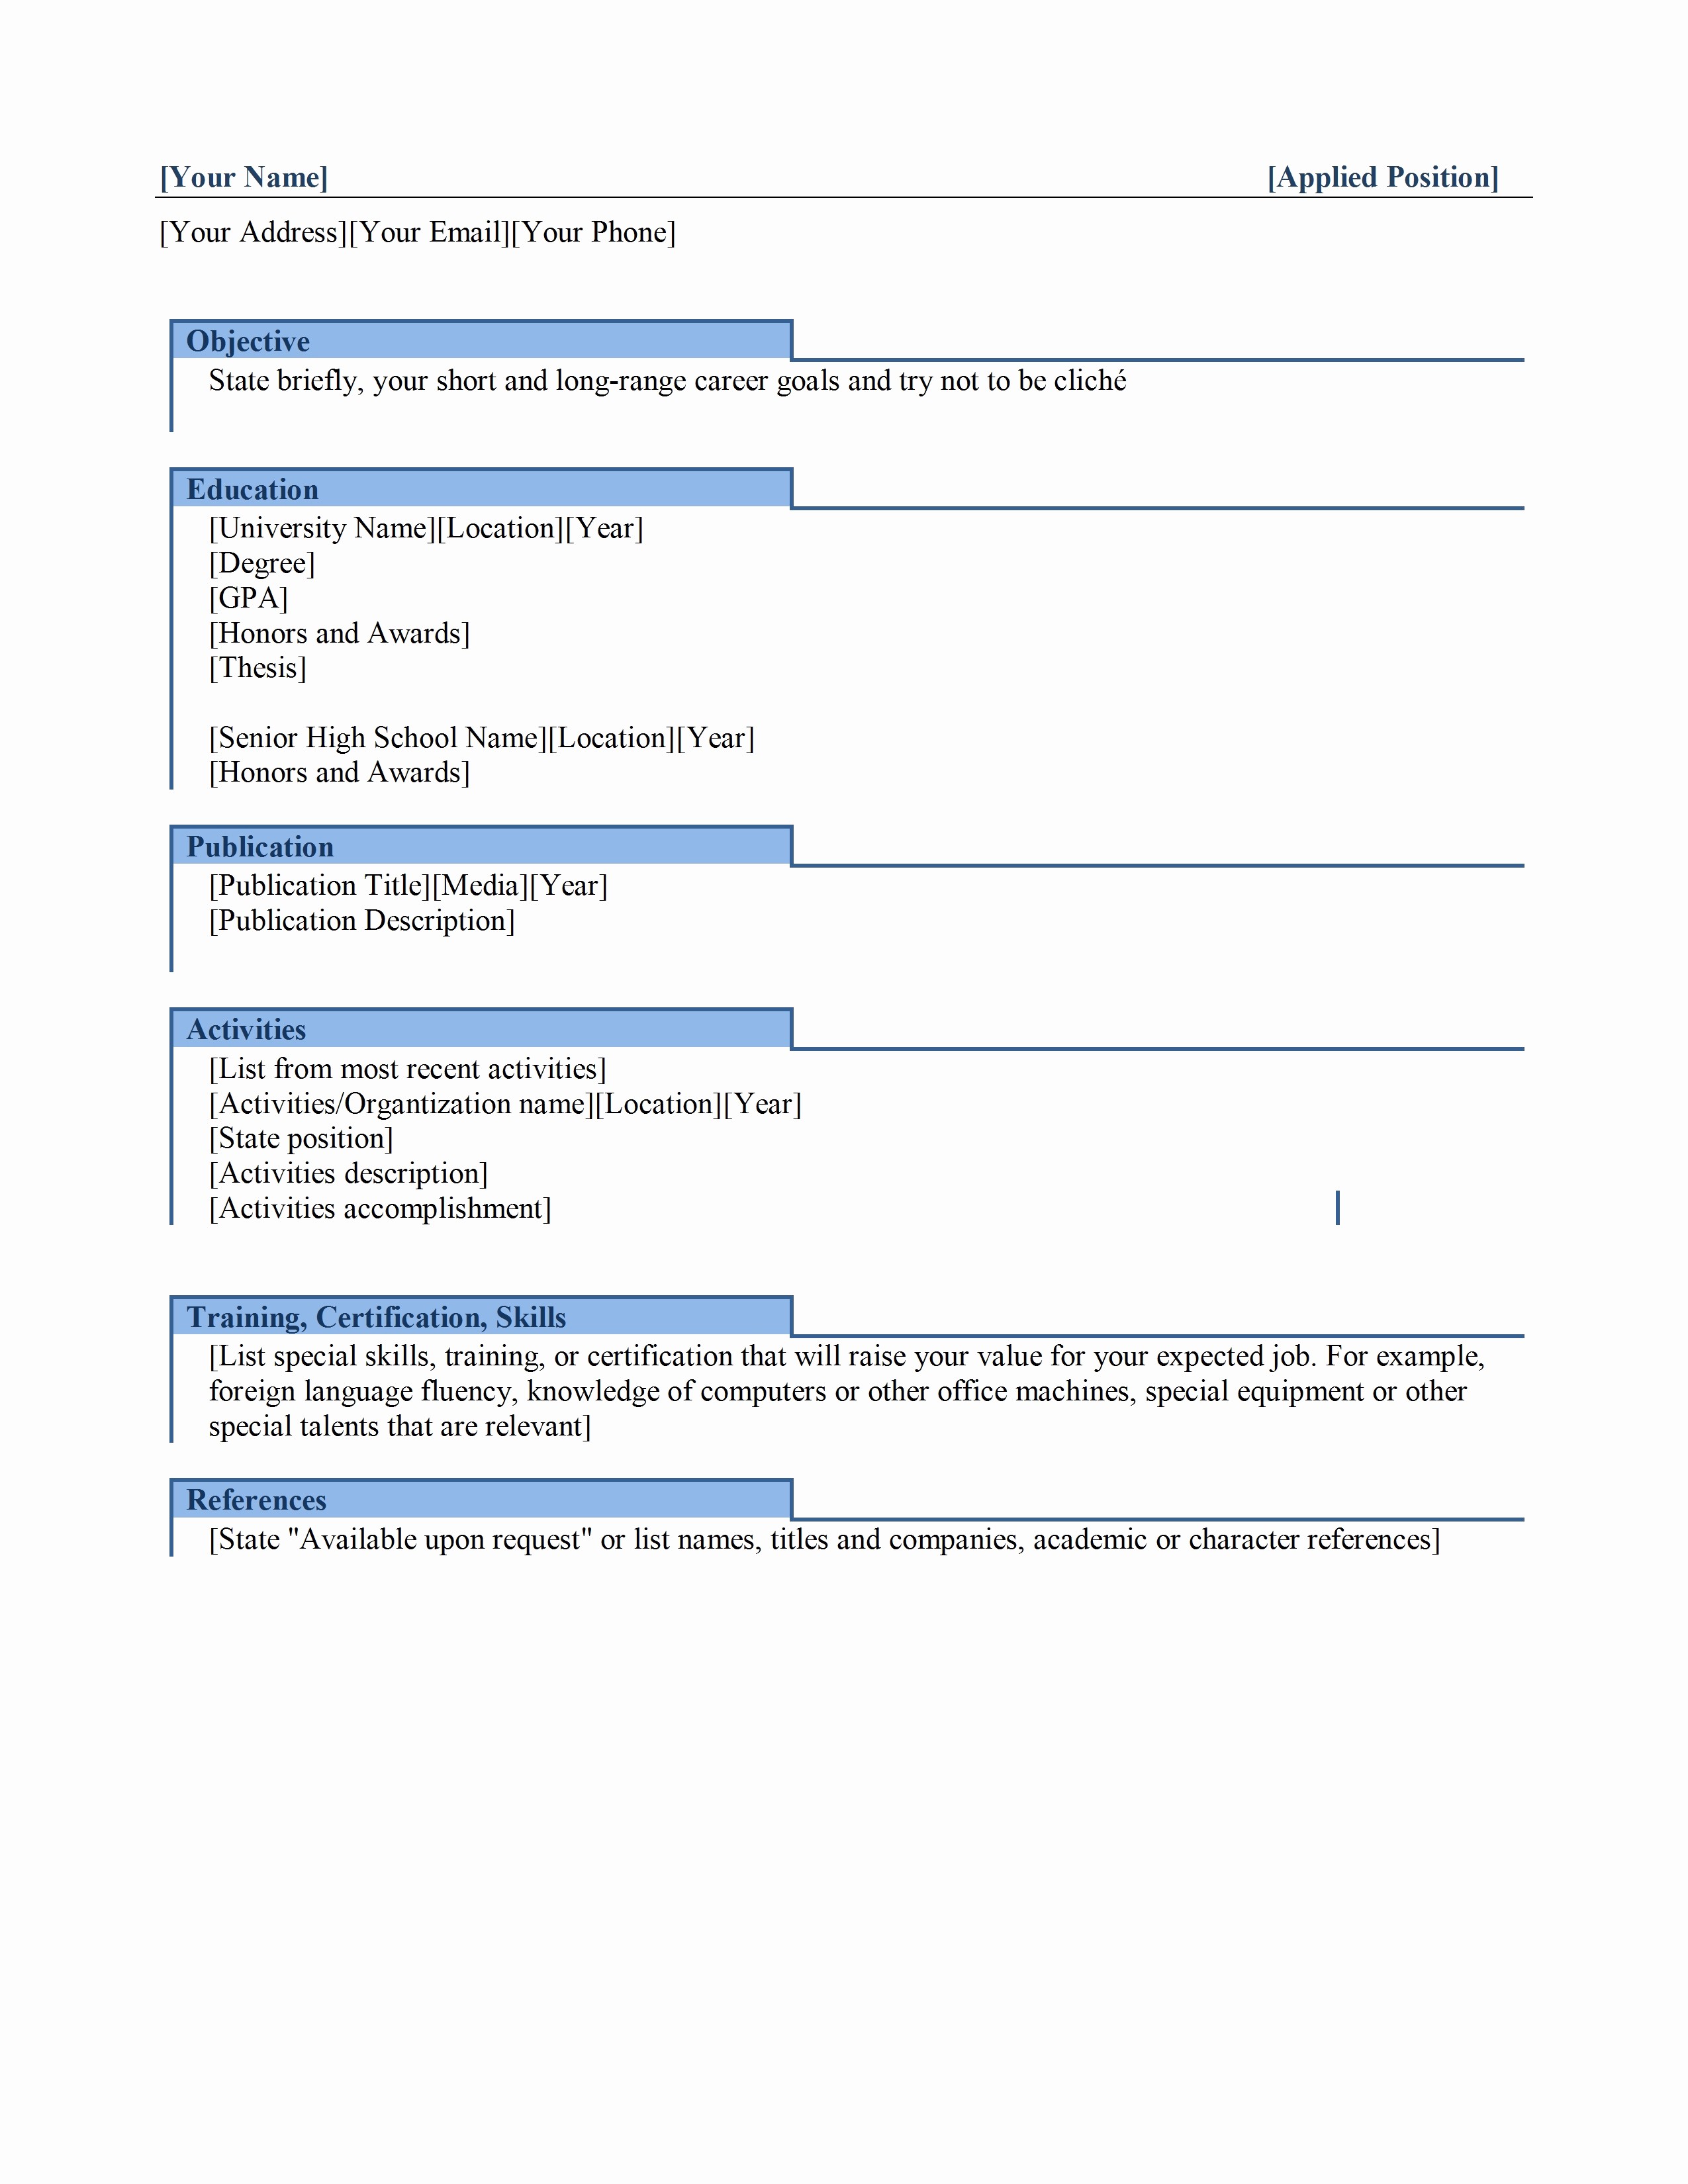 Resumes On Microsoft Word 2010 Inspirational Resume format Free Download In Ms Word 2010 Resume Ideas